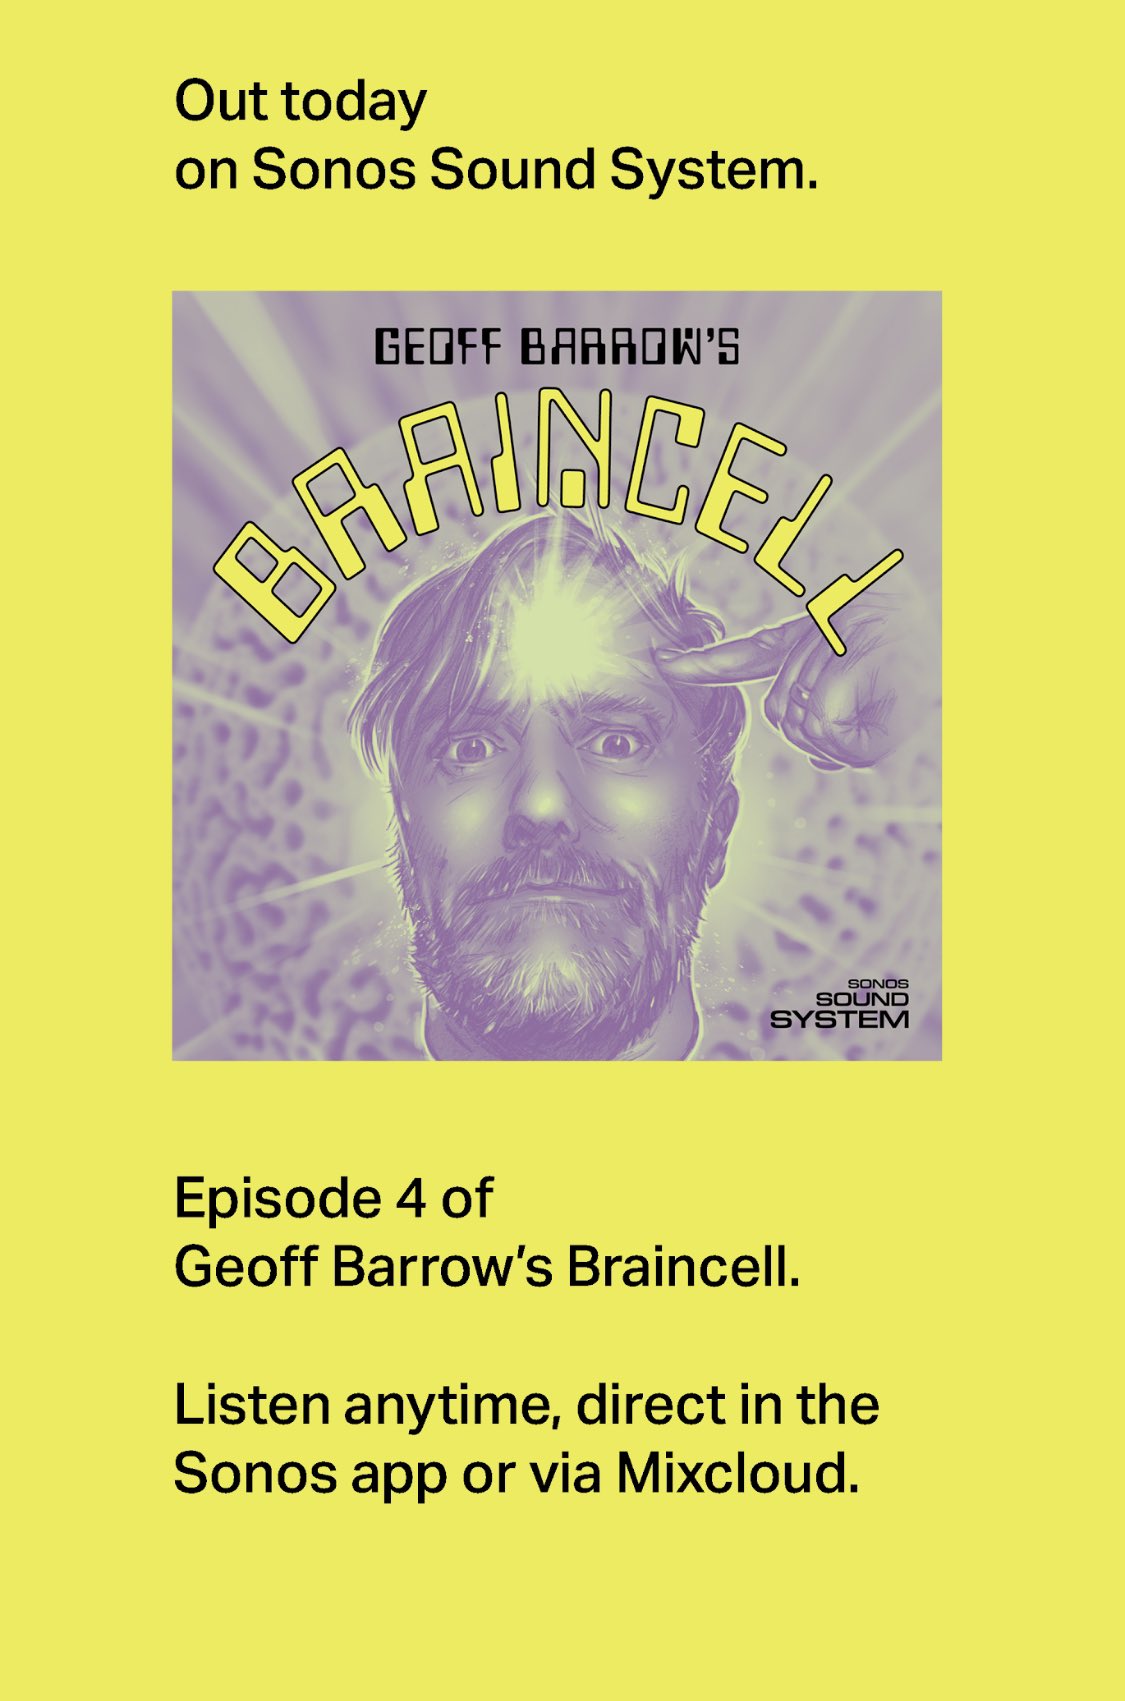 🏴‍☠️ Geoff Barrow 🏴‍☠️ on Twitter: "So here is No4 of my BRAINCELL show for Featuring Billy's Banger with @fourstringer and a load of tunes from my flickering BrainCell https://t.co/mISzGXhLQ6 https://t.co/mFeILrWROA" /